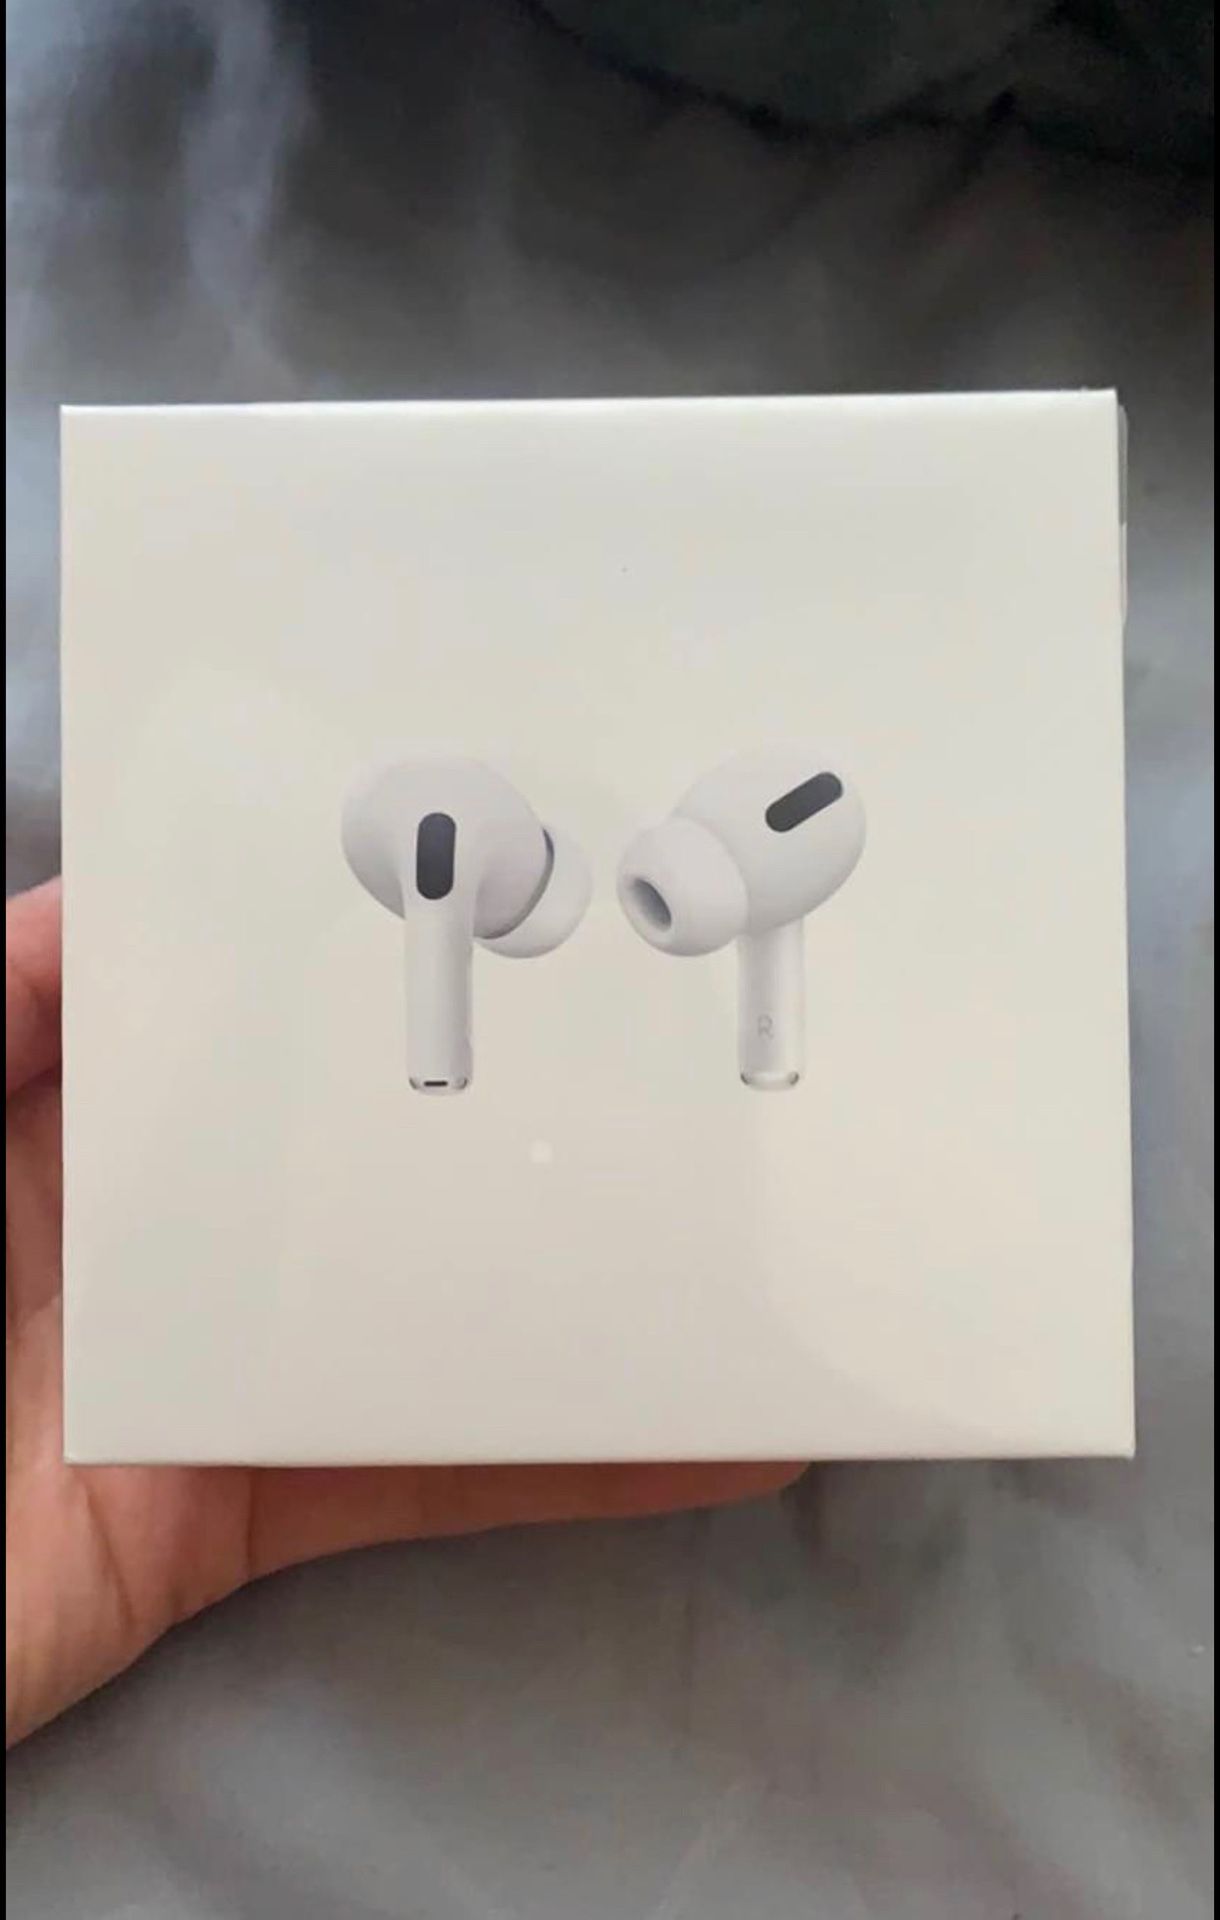 Brand New AirPods Pro never been Used!!